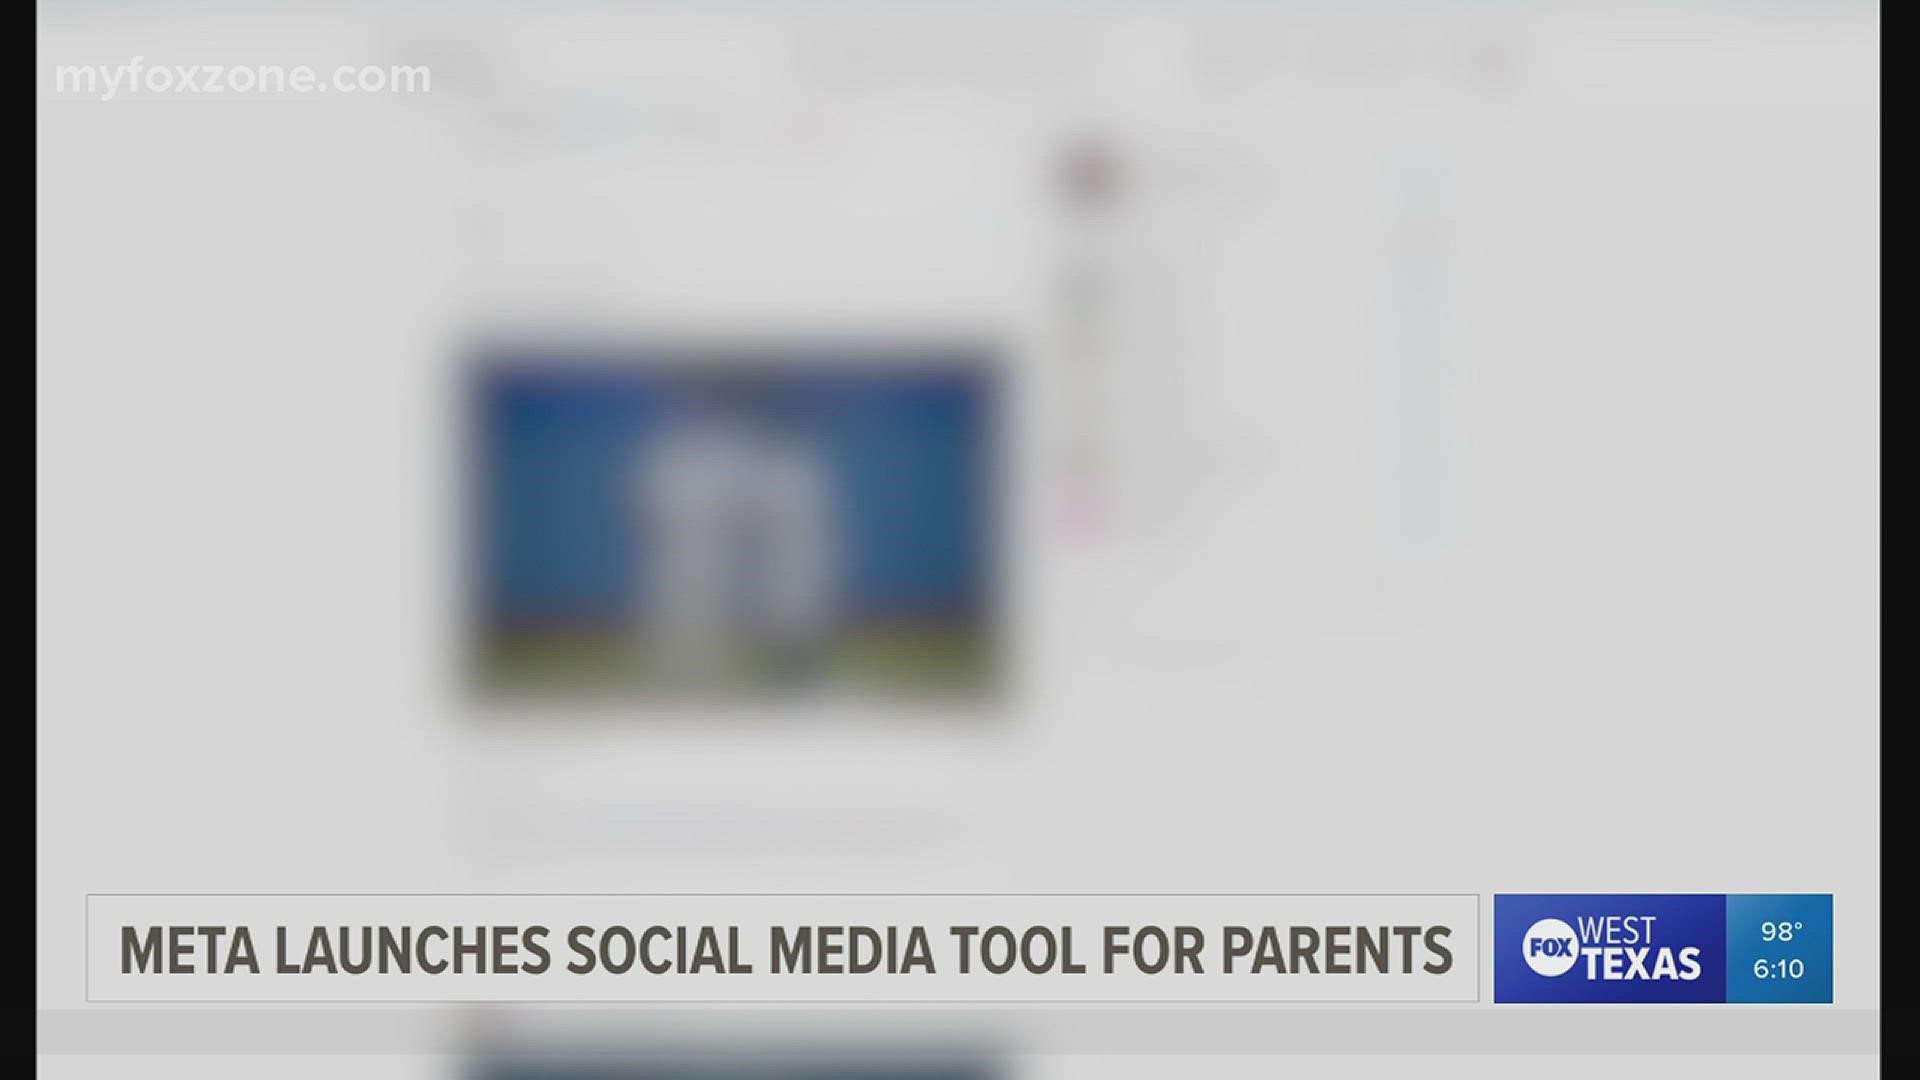 Family Center provides parents with tools and resources to help support their teens’ online experience.